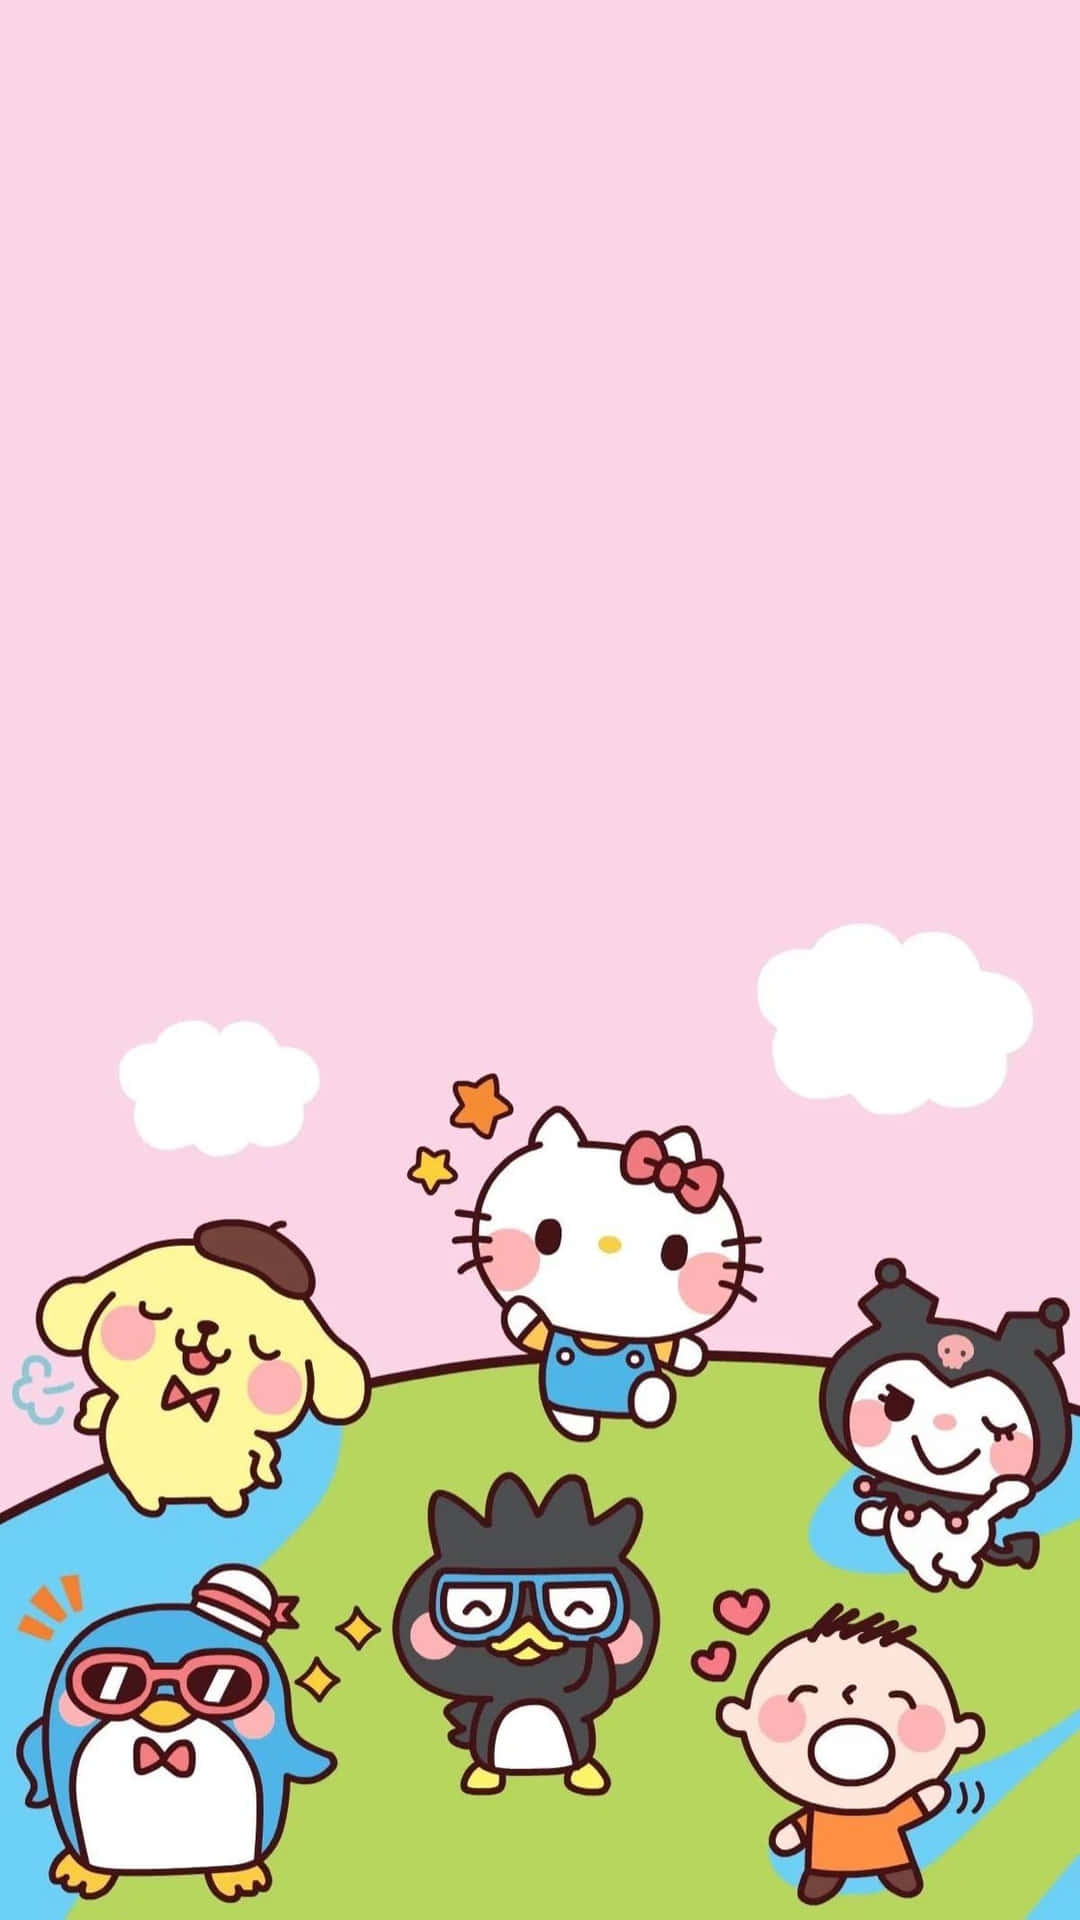 Brighten up your day with the Sanrio Phone! Wallpaper